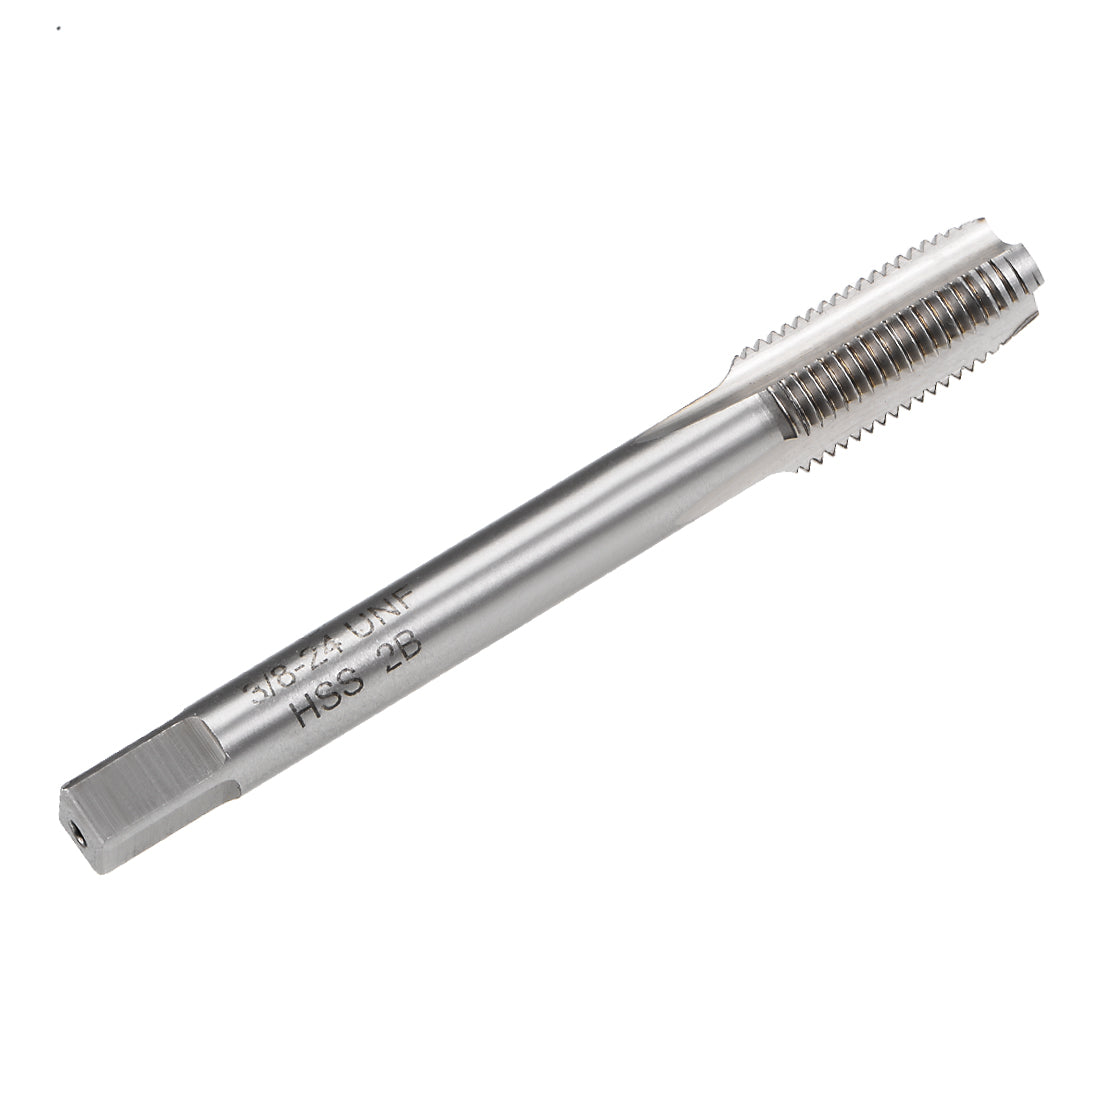 Uxcell Uxcell Machine Tap 3/8-24 UNF Thread Pitch 2B Class 3 Flutes High Speed Steel